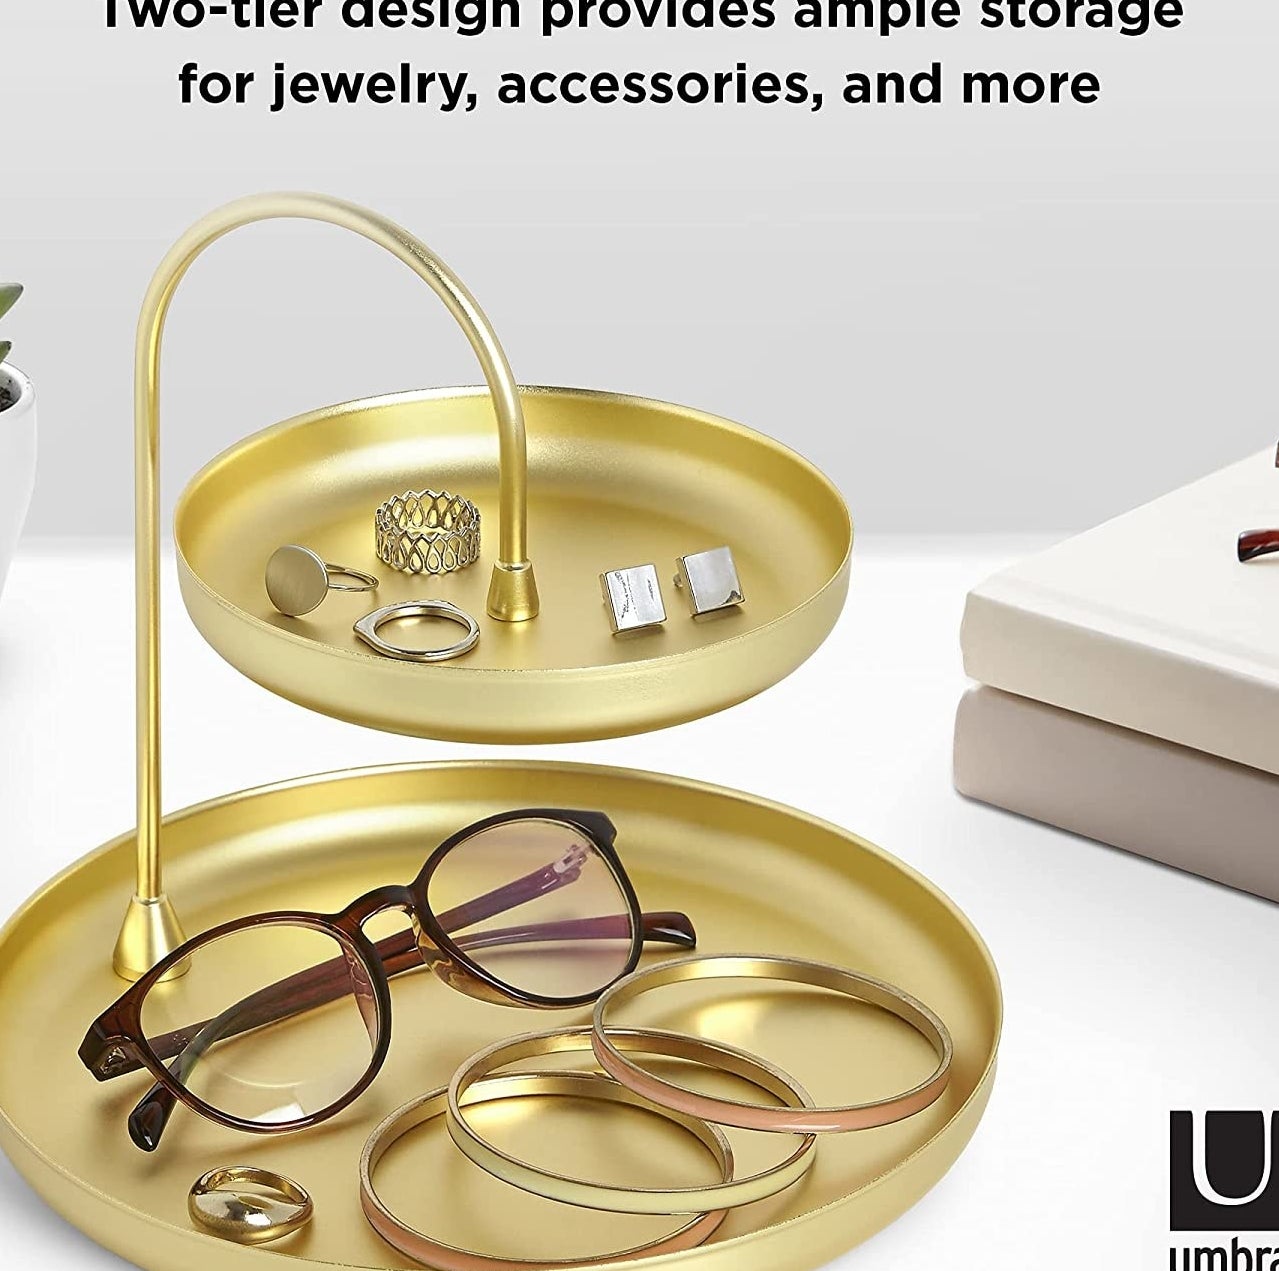 The trinket tray sitting on a table with bracelets, rings, cufflinks, and glasses sitting inside of it